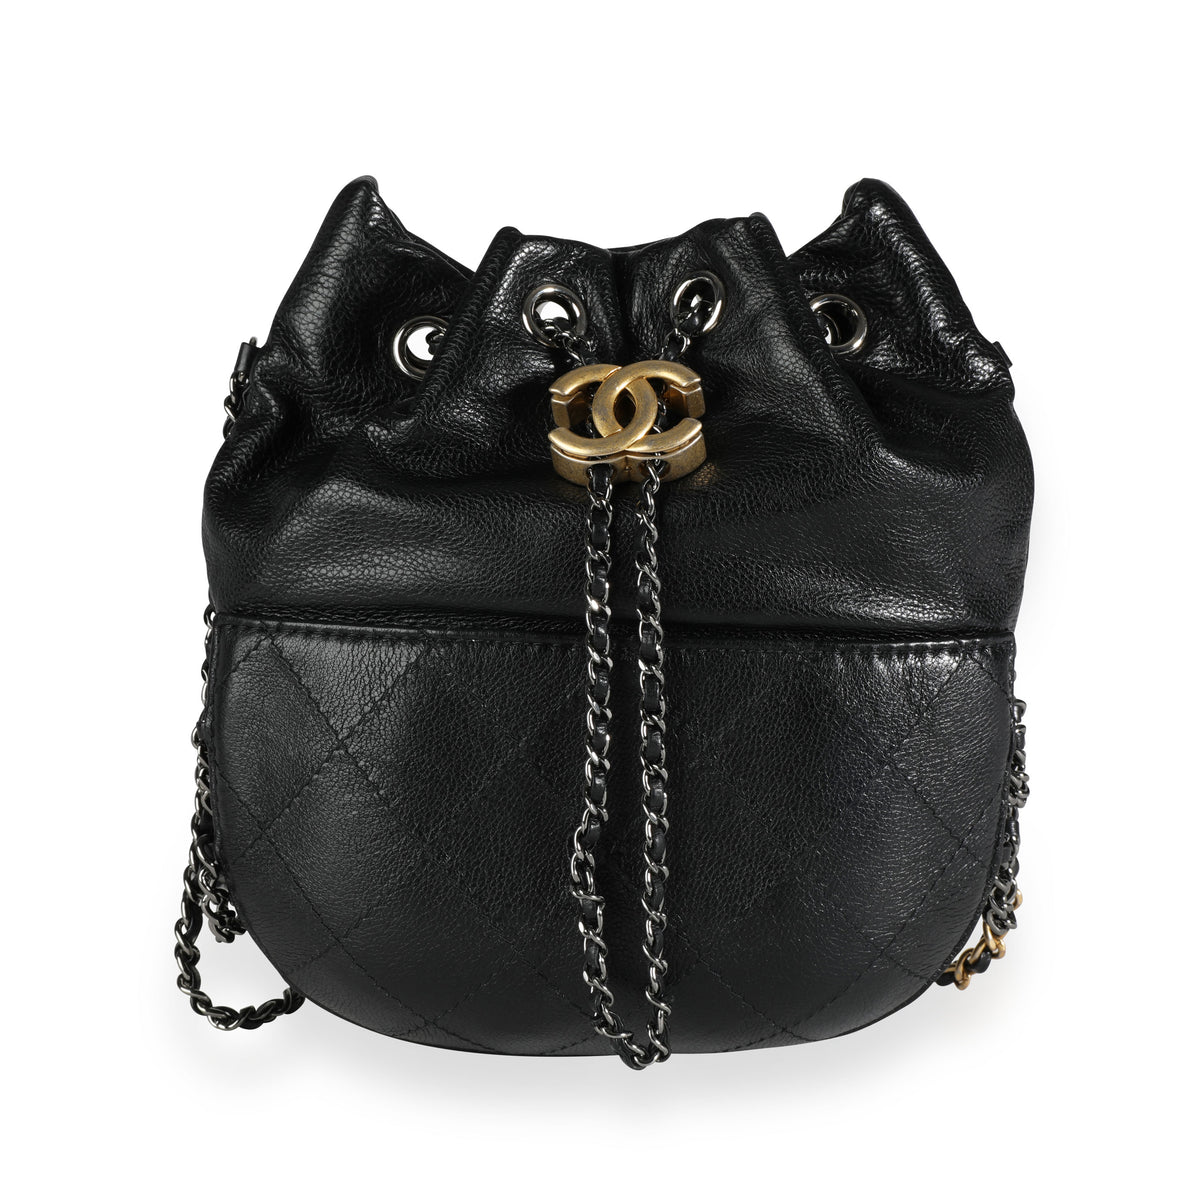 Chanel Gabrielle Drawstring Bag Quilted Calfskin Small